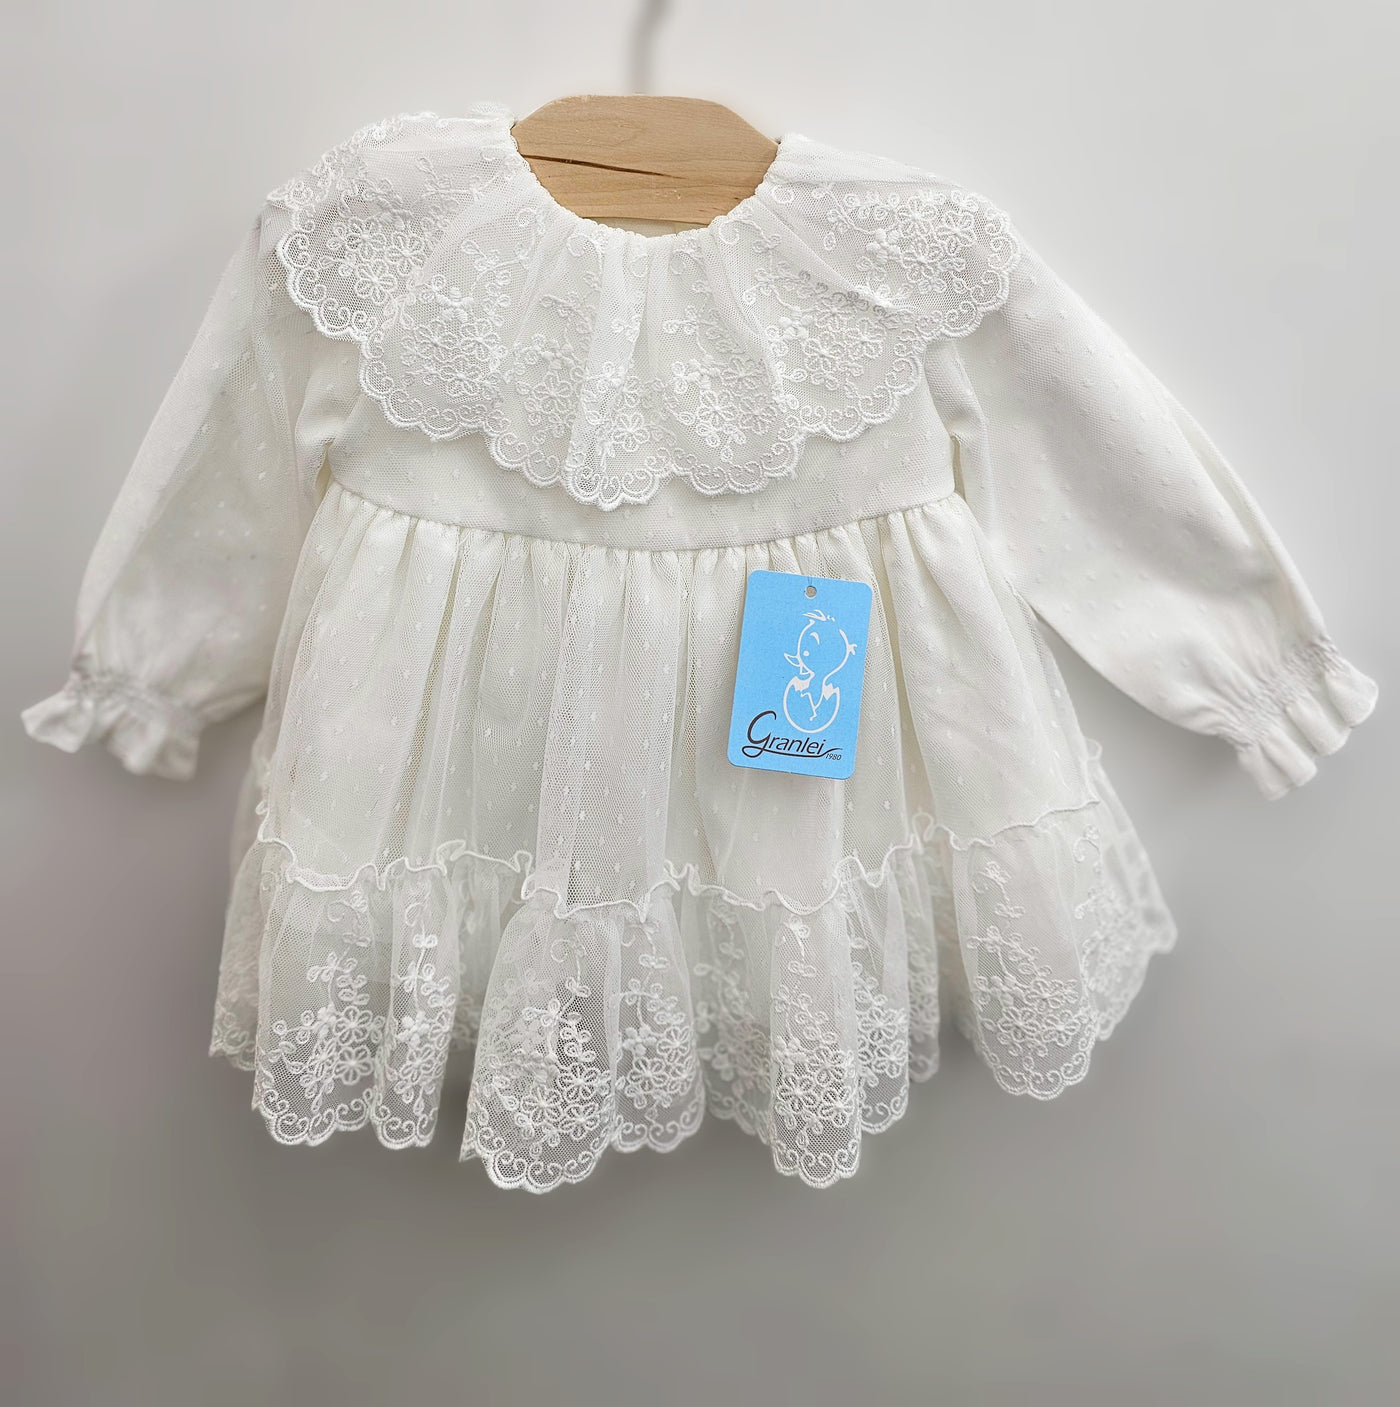 Vintage White Lace-Embroidered Baby Girl Dress